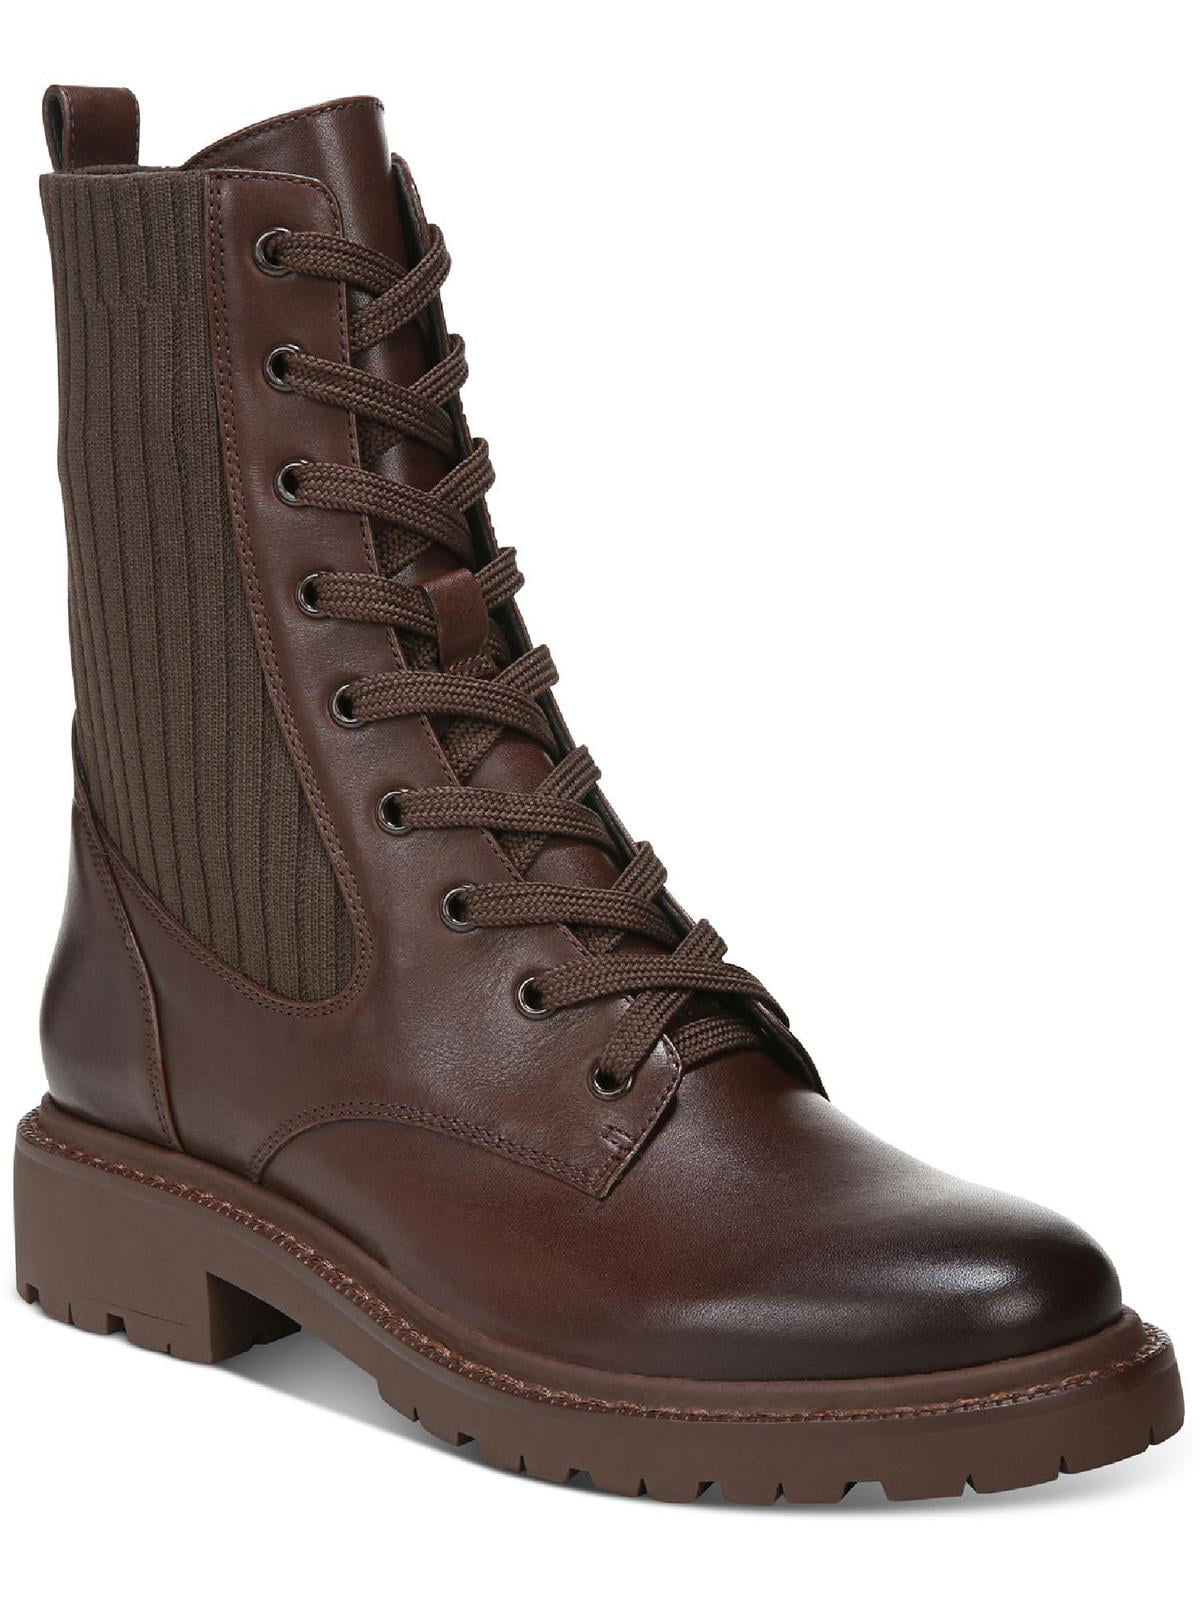 Sam Edelman Womens Lydell Suede Lace Up Ankle Boots - Walmart.com